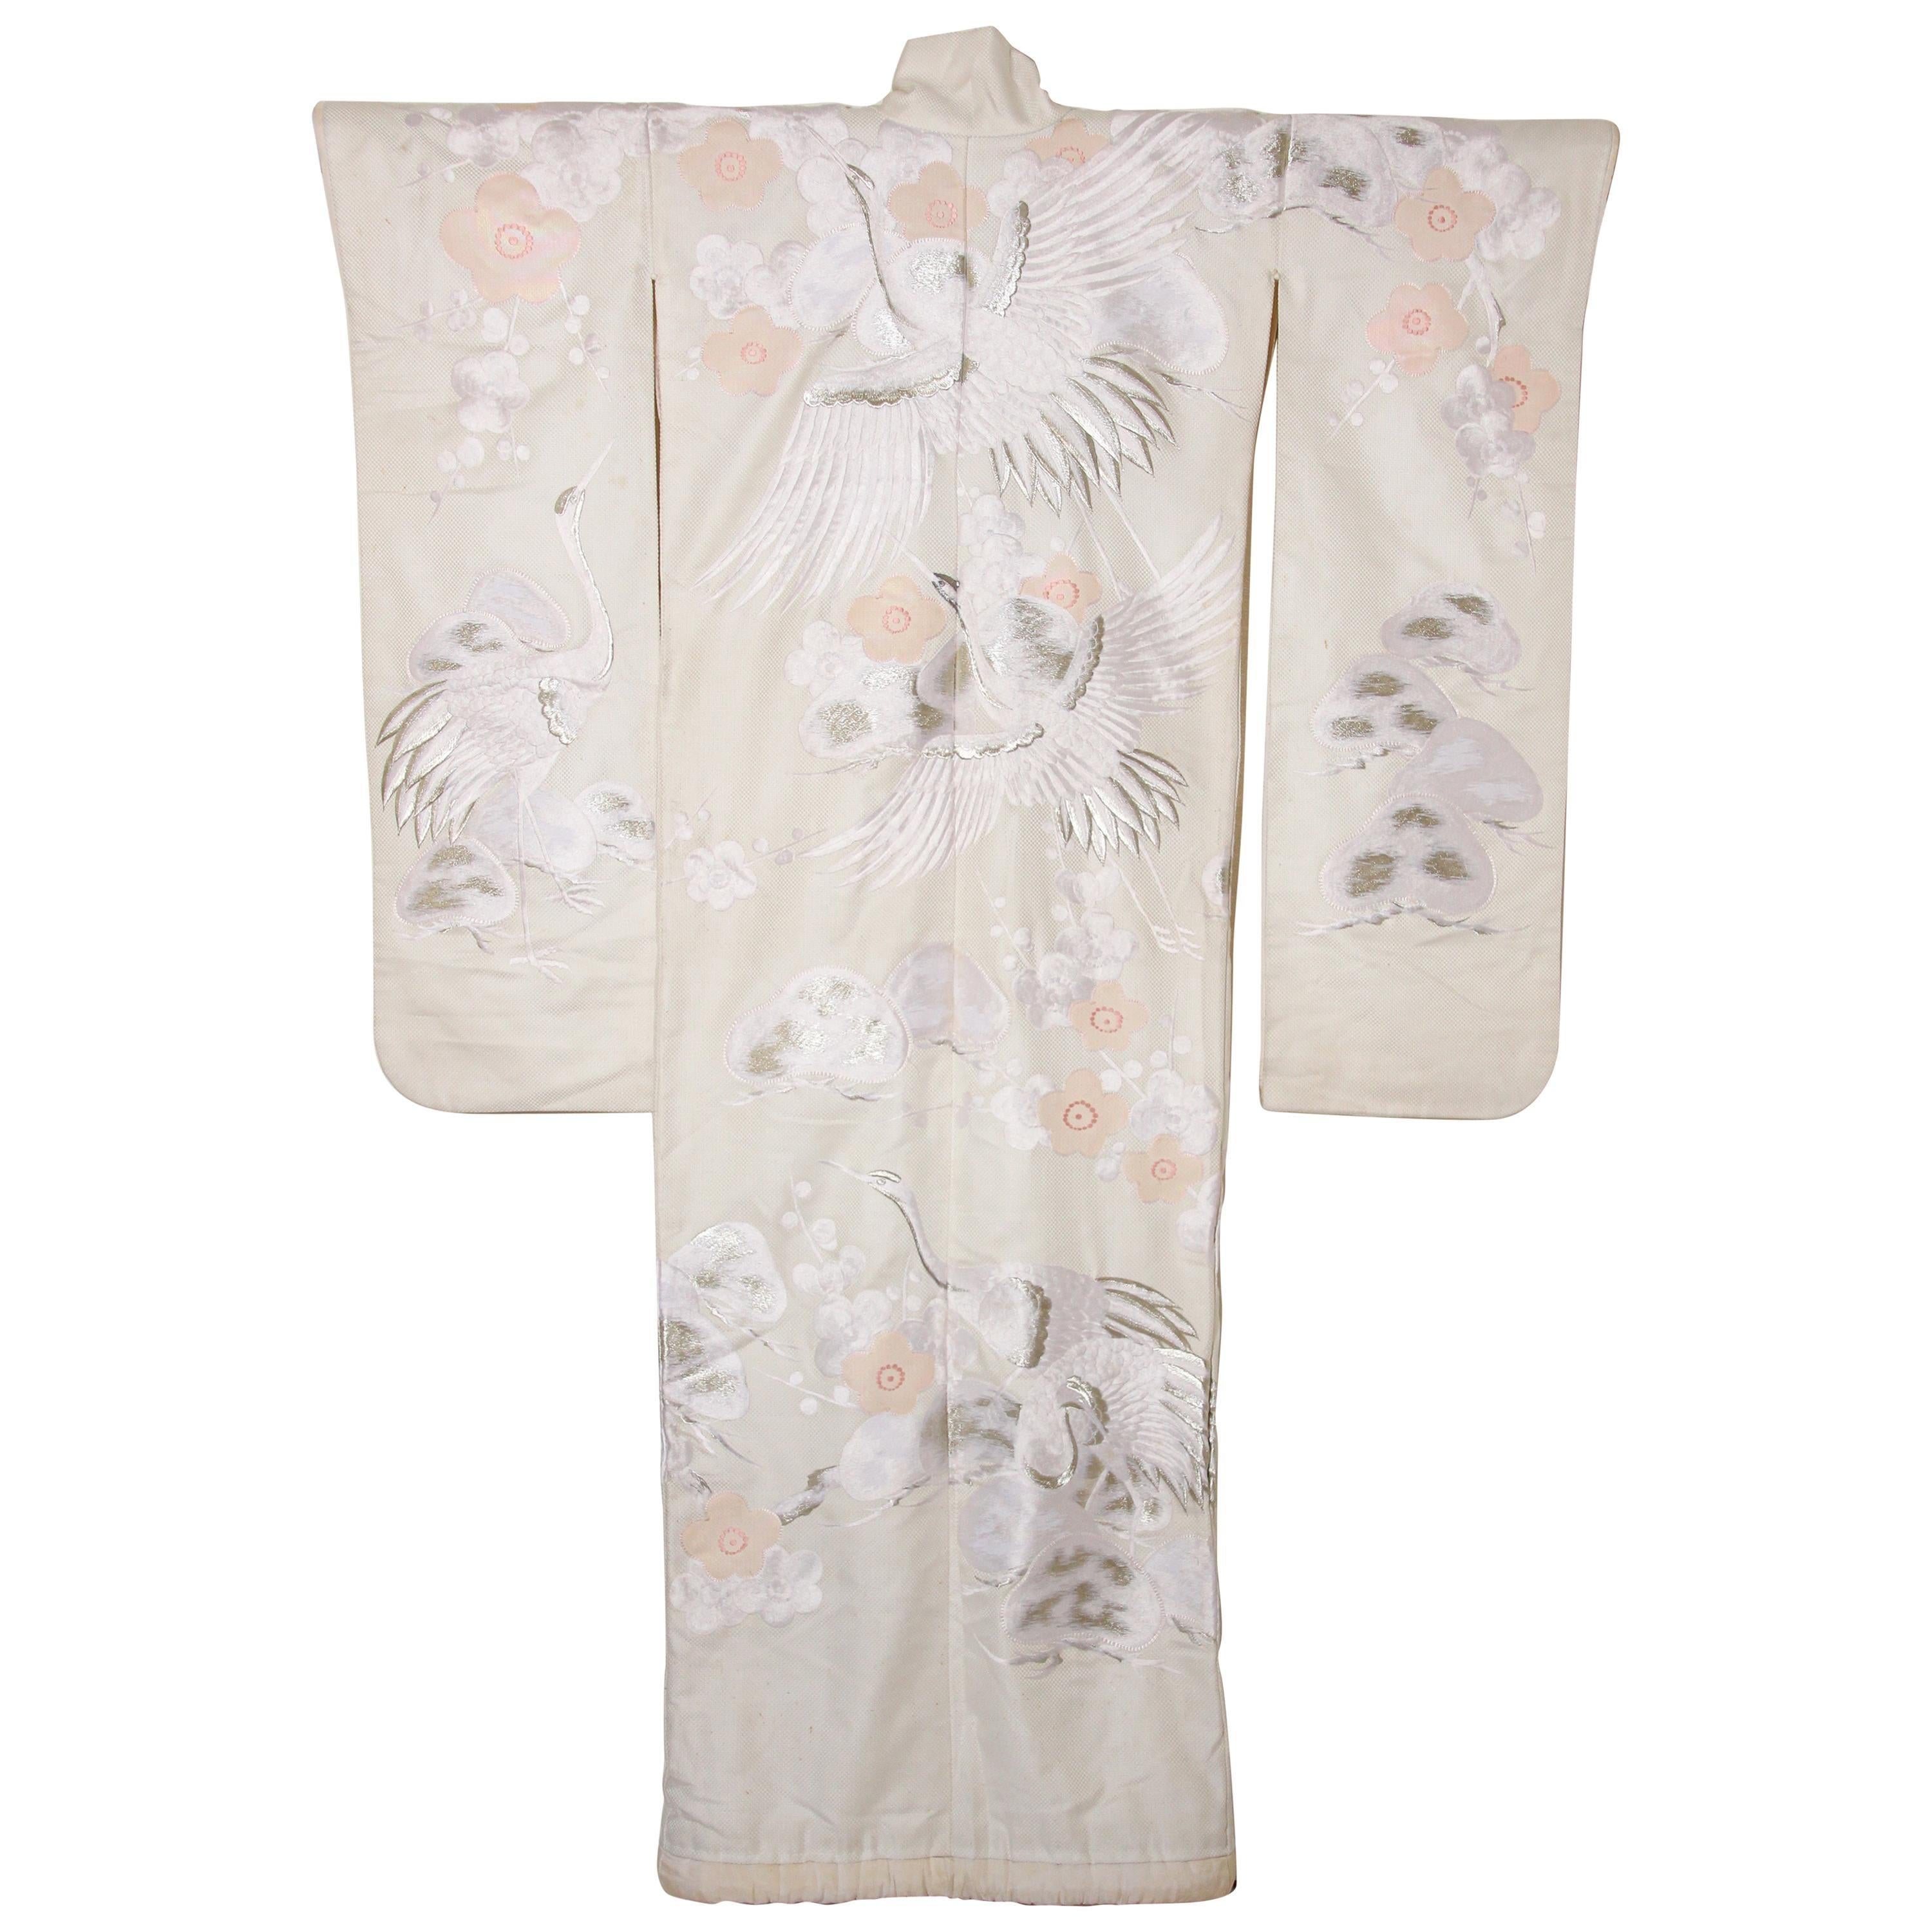 Shiromuku is a wedding kimono originally worn at weddings in samurai families, the shiromuku has become one type of wedding kimono worn by brides in Japan.
White has symbolized the sun’s rays since ancient times, and from the Heian period, white